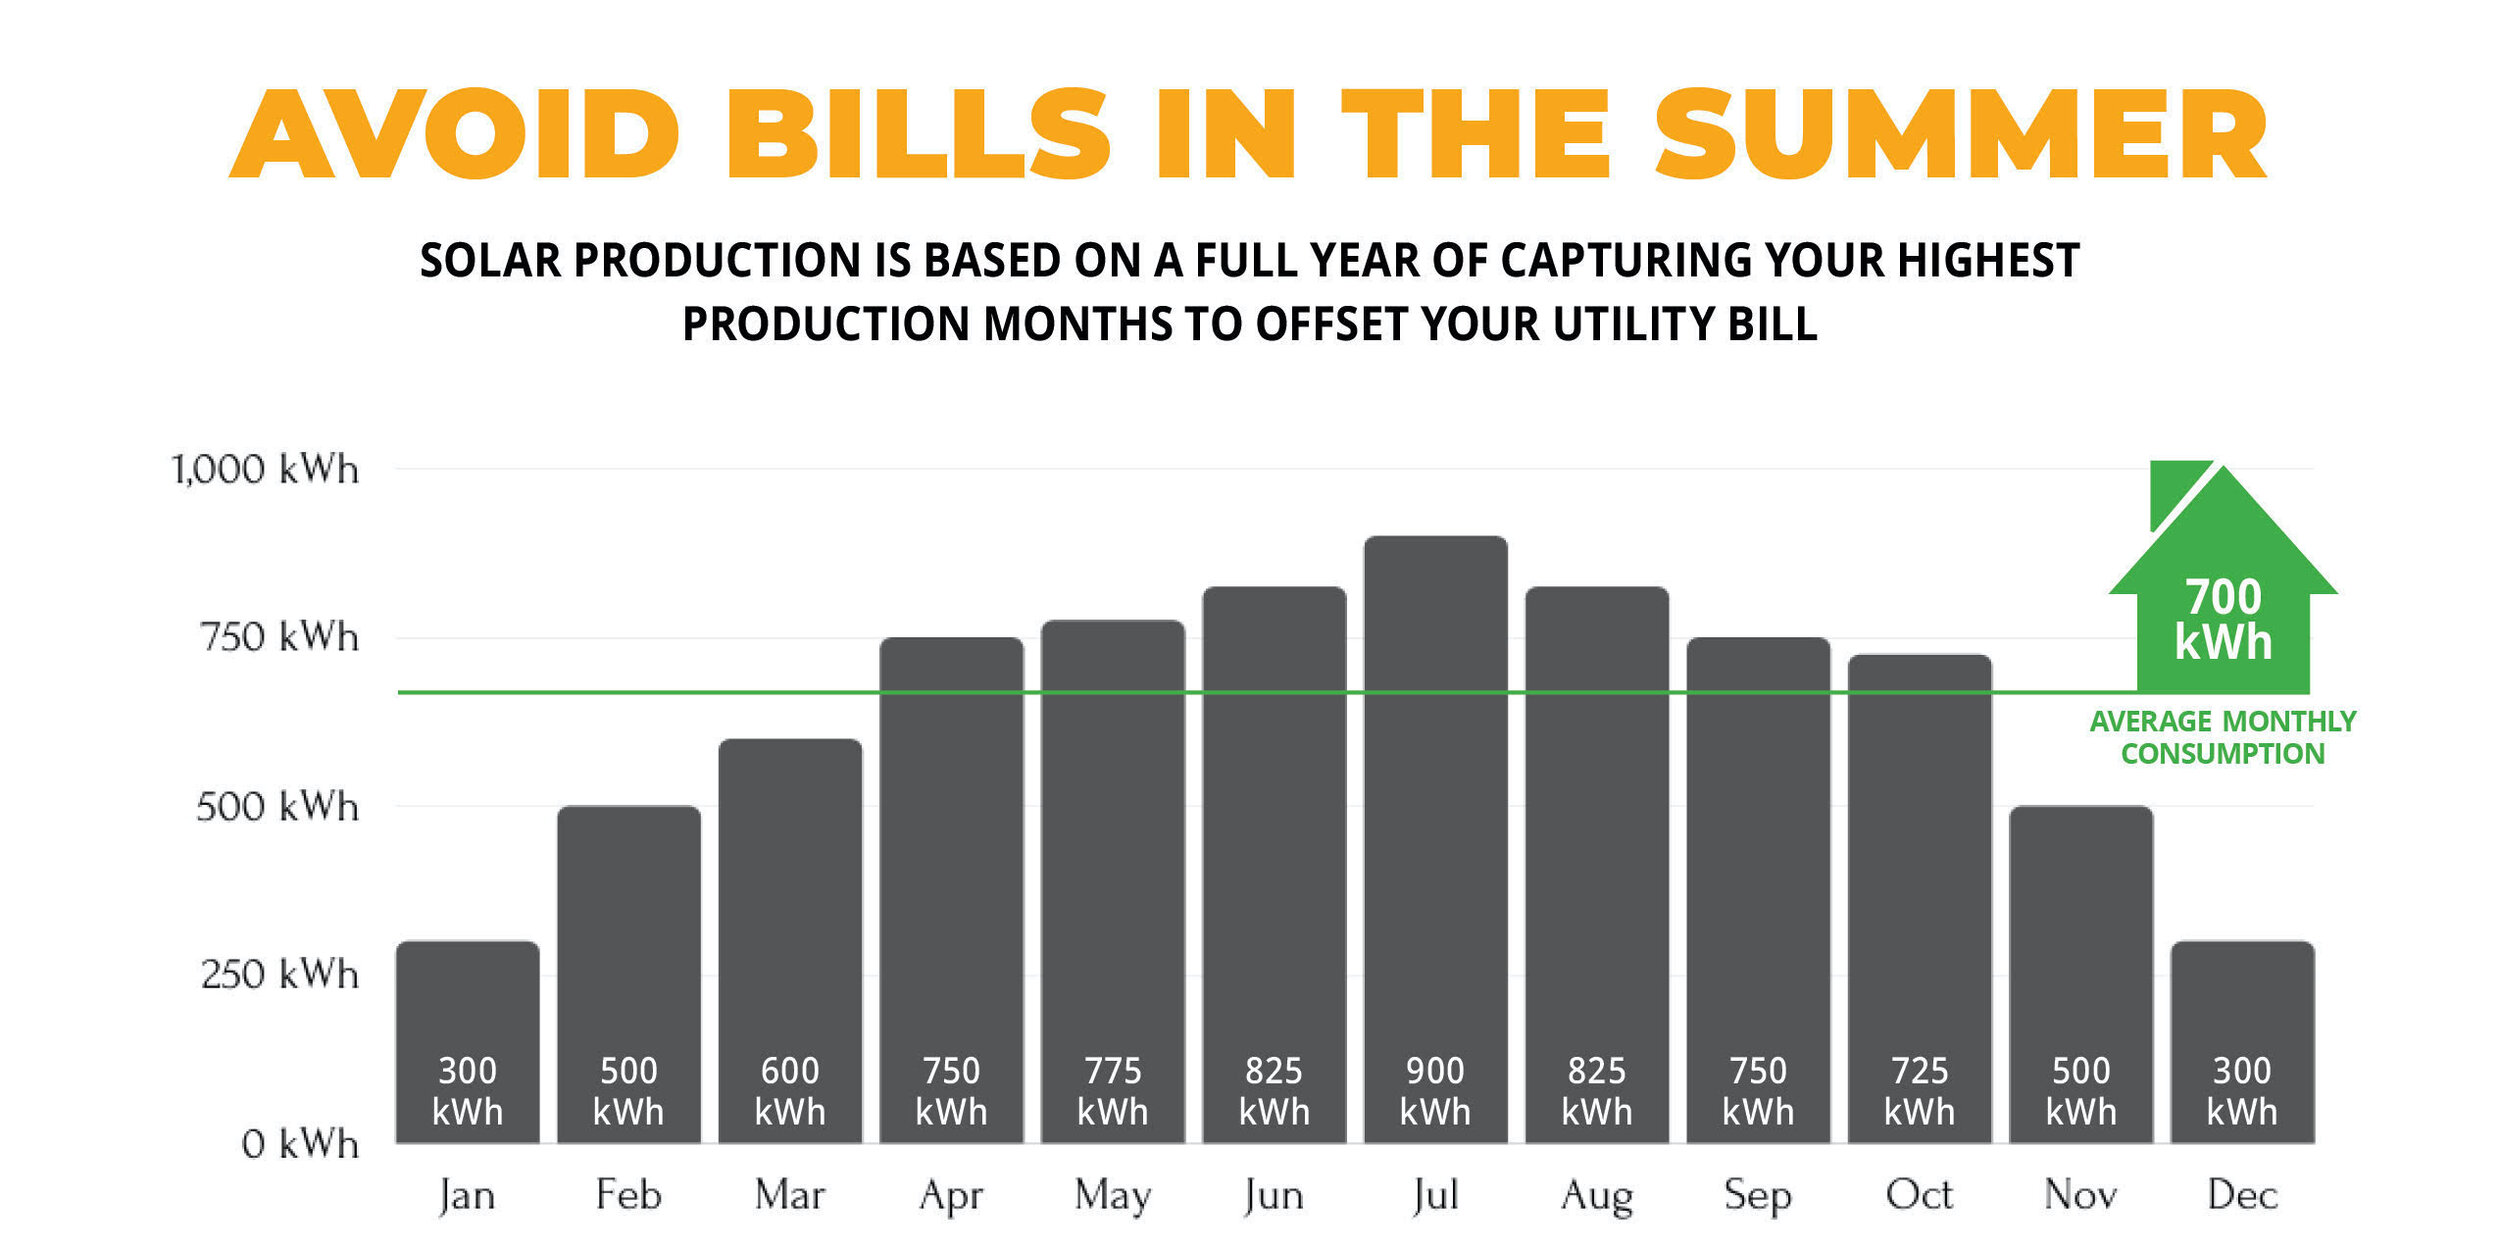 Why Is Spring the Best Time To Go Solar in California?